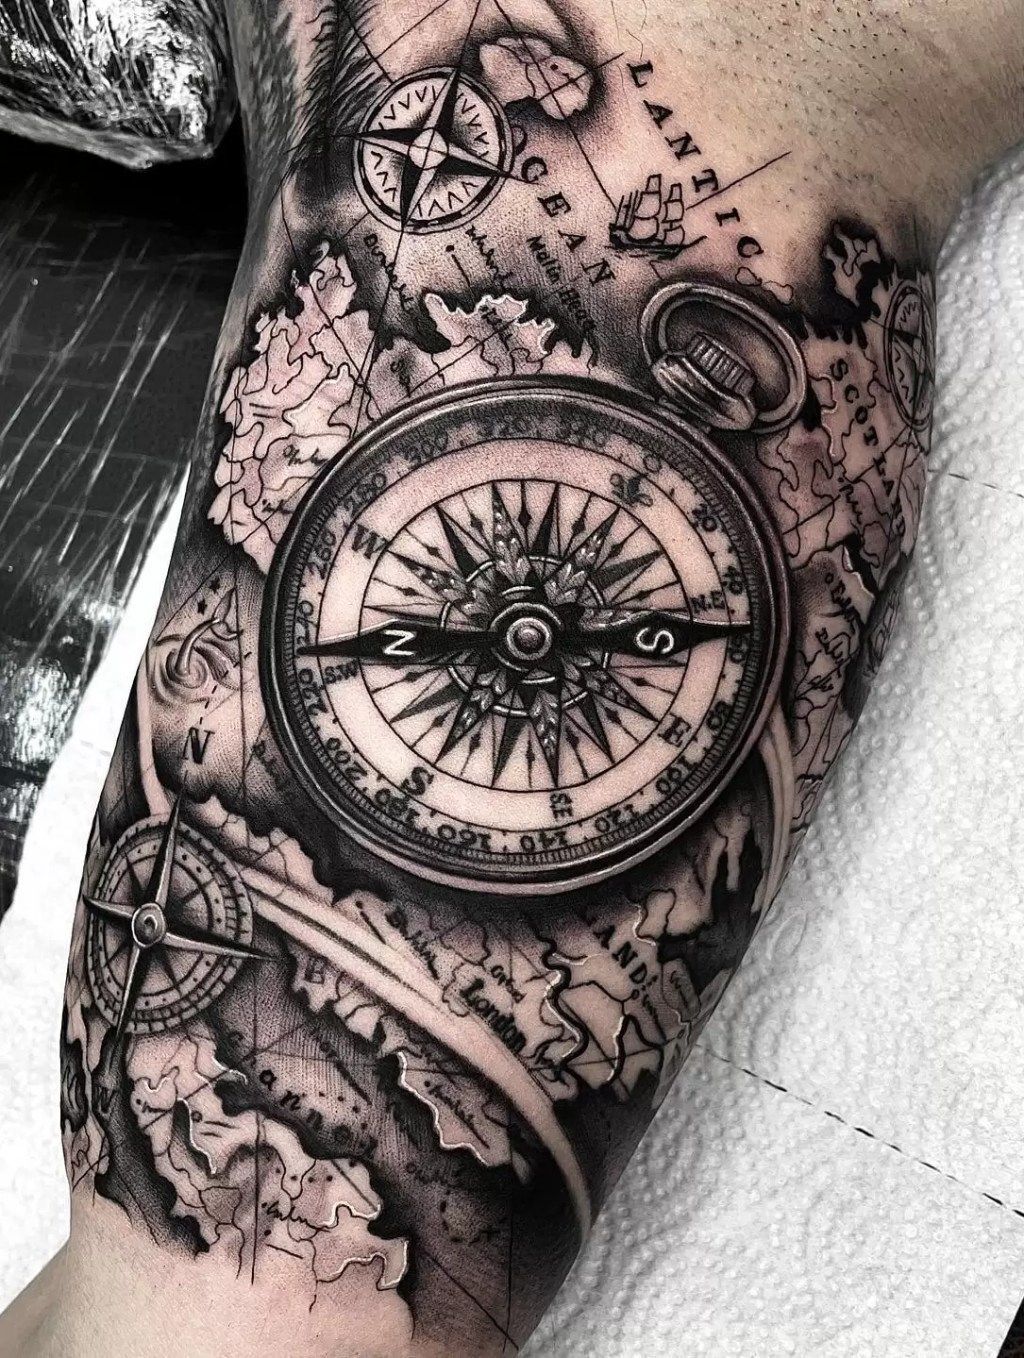 Mountains and compass tattoo art. symbol of tourism, adventure, wall mural  • murals earth, wild nature, tribal | myloview.com